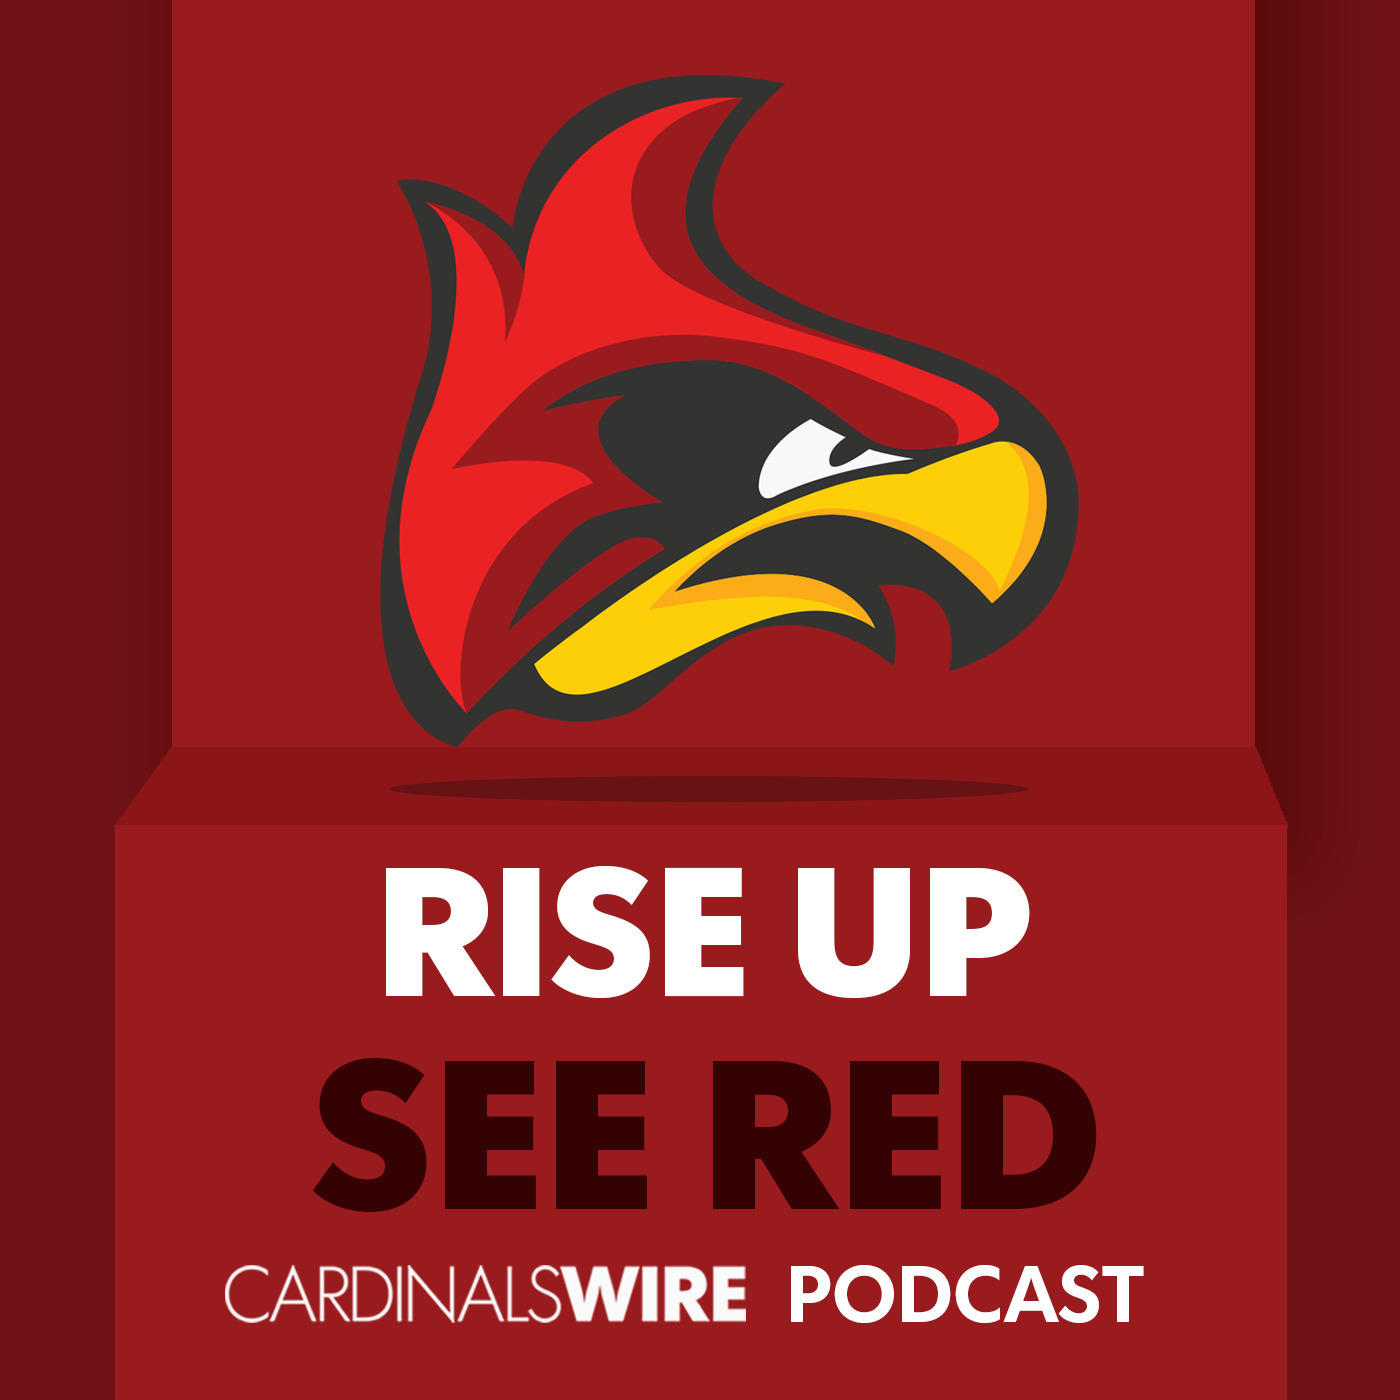 Cardinals-Texans reactions, injuries, COVID and Cardinals-Packers preview